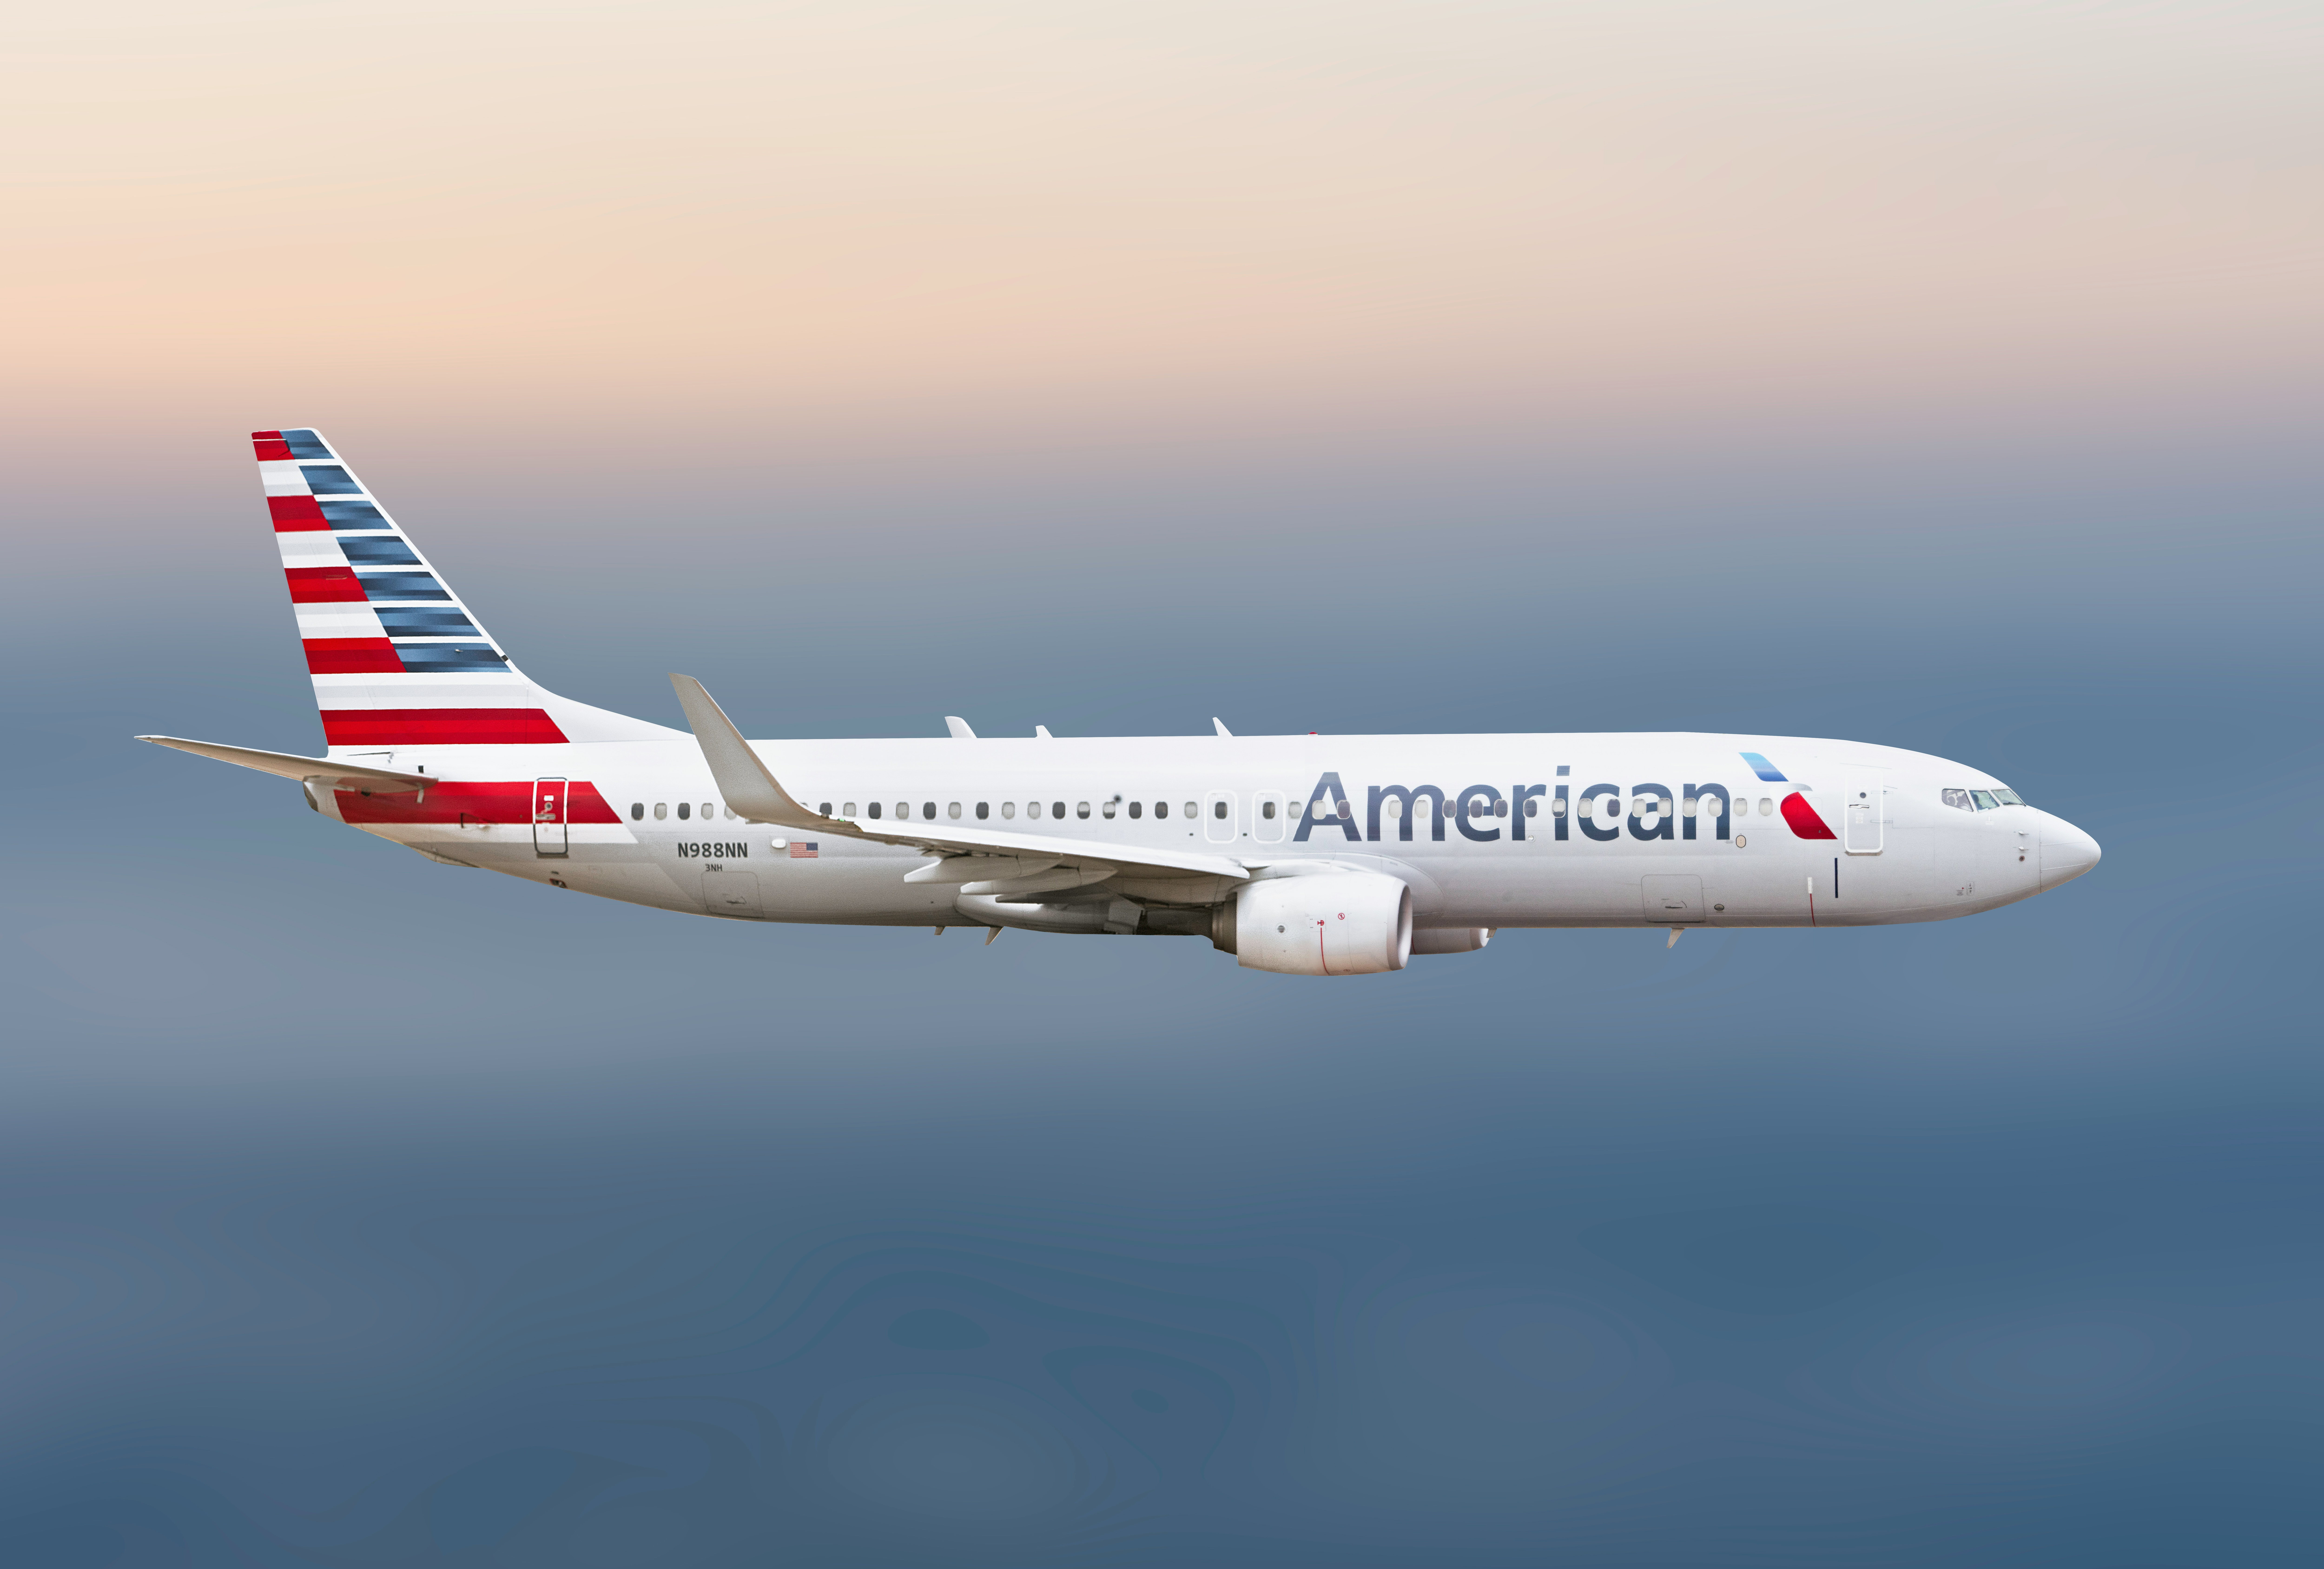 American Airlines Working To 'Regain Trust' After 8 Black Men Removed From Flight Over Alleged 'Body Odor'